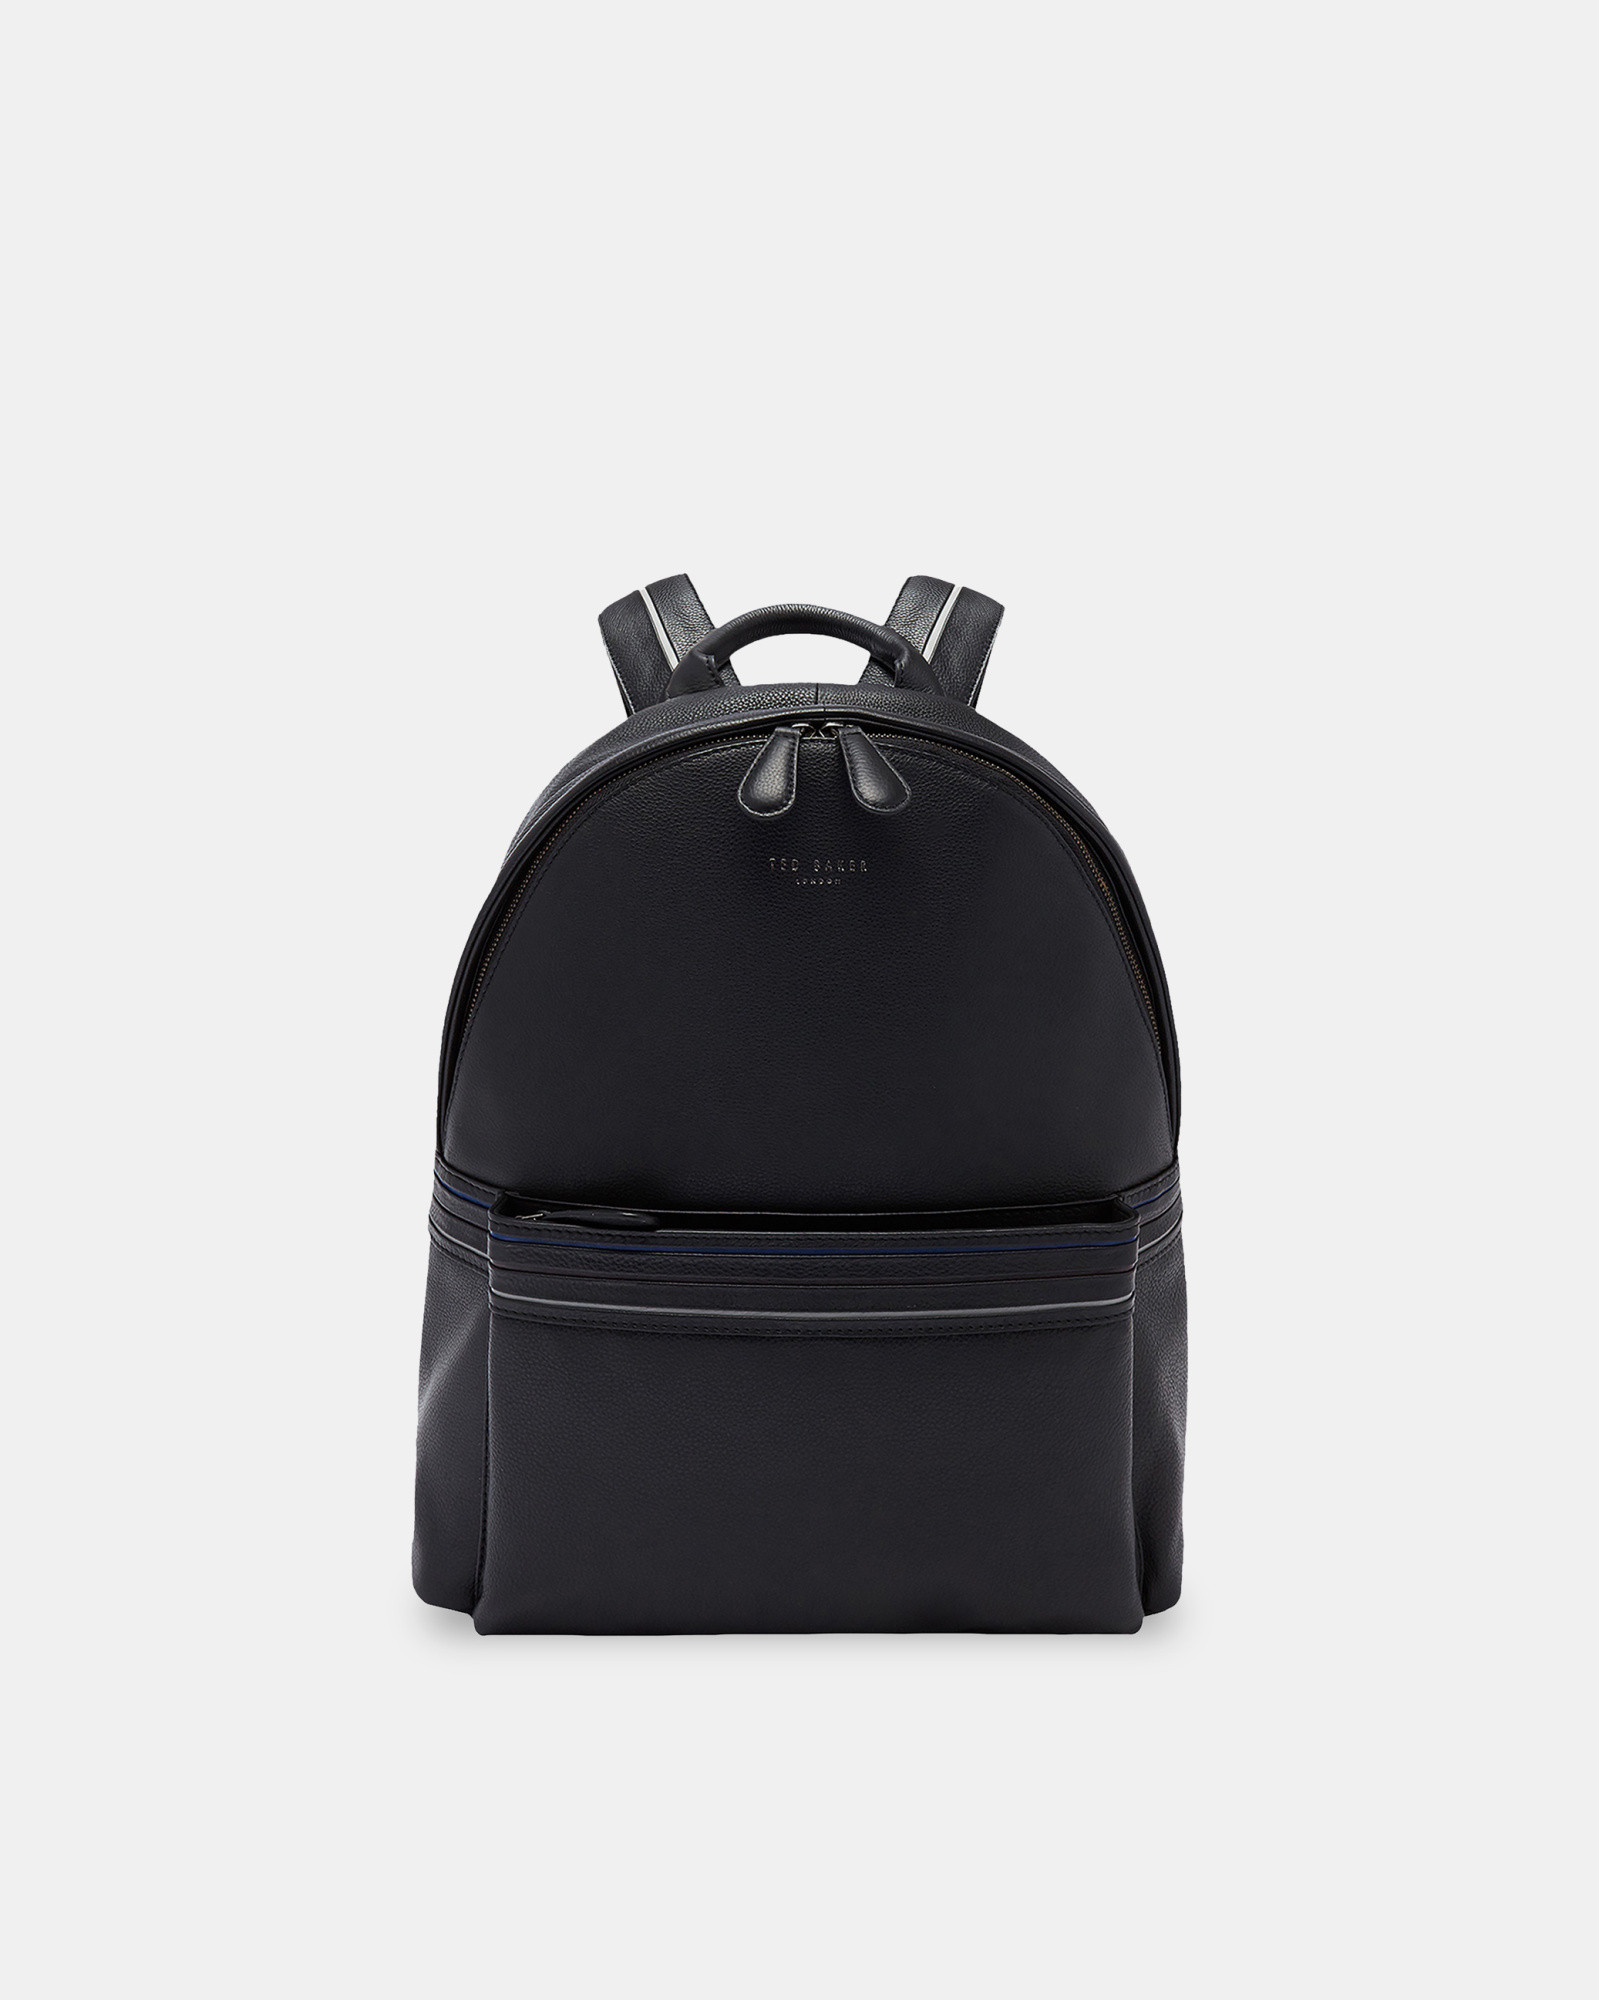 HUNTMAN Striped detail leather backpack